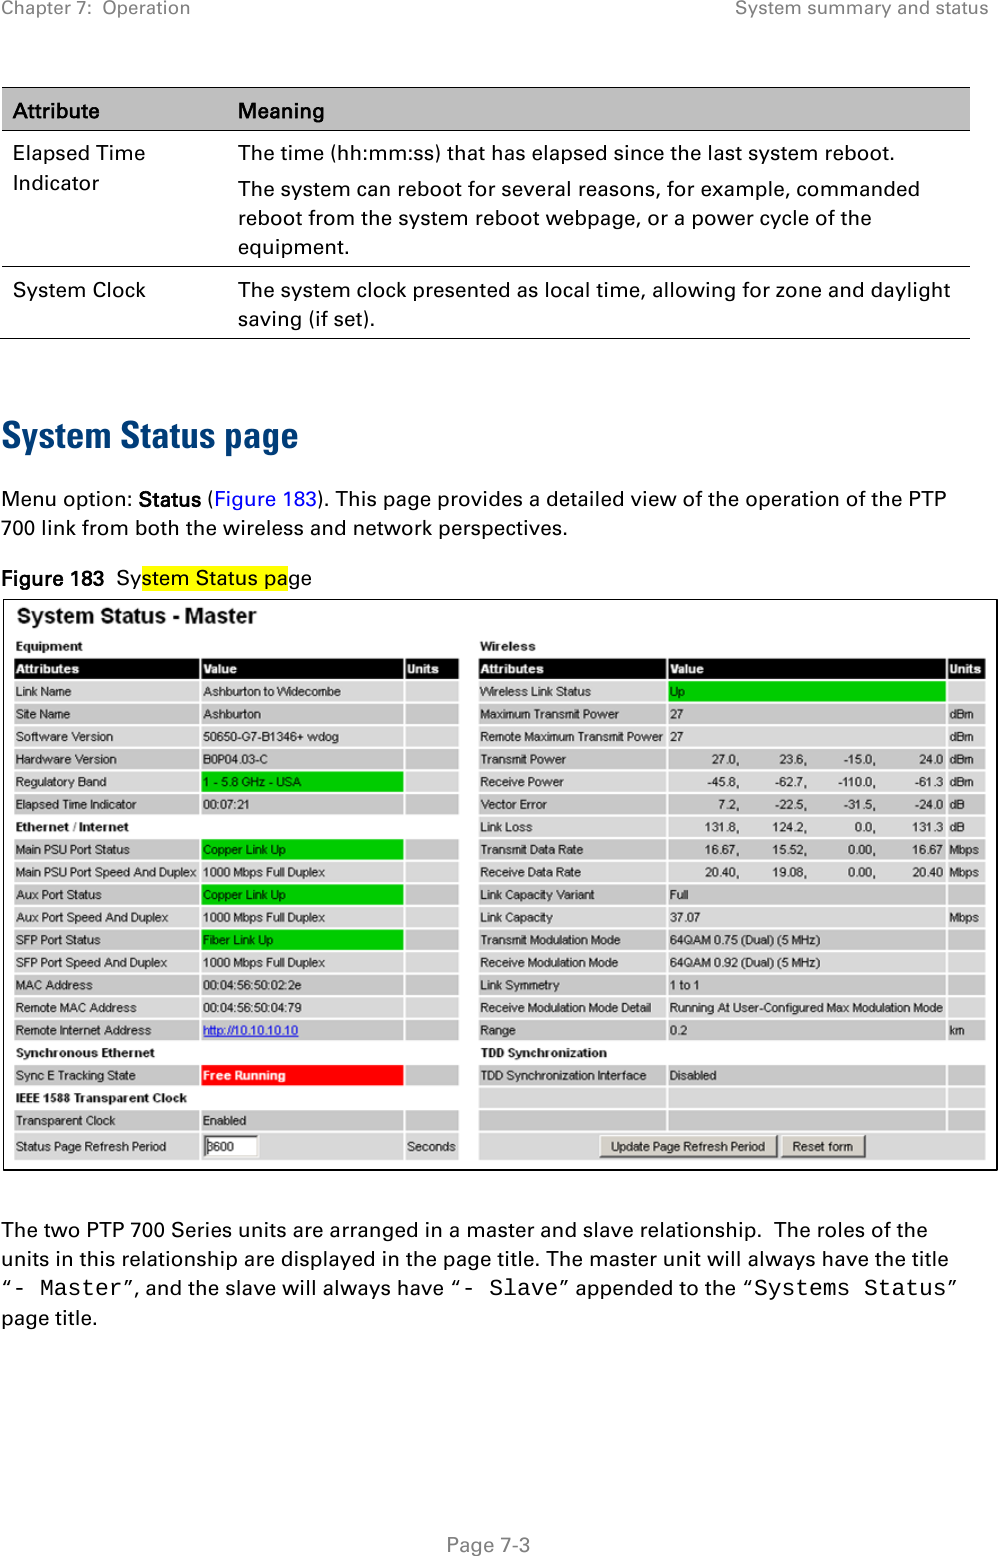 Chapter 7:  Operation System summary and status  Attribute Meaning Elapsed Time Indicator The time (hh:mm:ss) that has elapsed since the last system reboot. The system can reboot for several reasons, for example, commanded reboot from the system reboot webpage, or a power cycle of the equipment. System Clock The system clock presented as local time, allowing for zone and daylight saving (if set).  System Status page Menu option: Status (Figure 183). This page provides a detailed view of the operation of the PTP 700 link from both the wireless and network perspectives. Figure 183  System Status page   The two PTP 700 Series units are arranged in a master and slave relationship.  The roles of the units in this relationship are displayed in the page title. The master unit will always have the title “- Master”, and the slave will always have “- Slave” appended to the “Systems Status” page title.   Page 7-3 